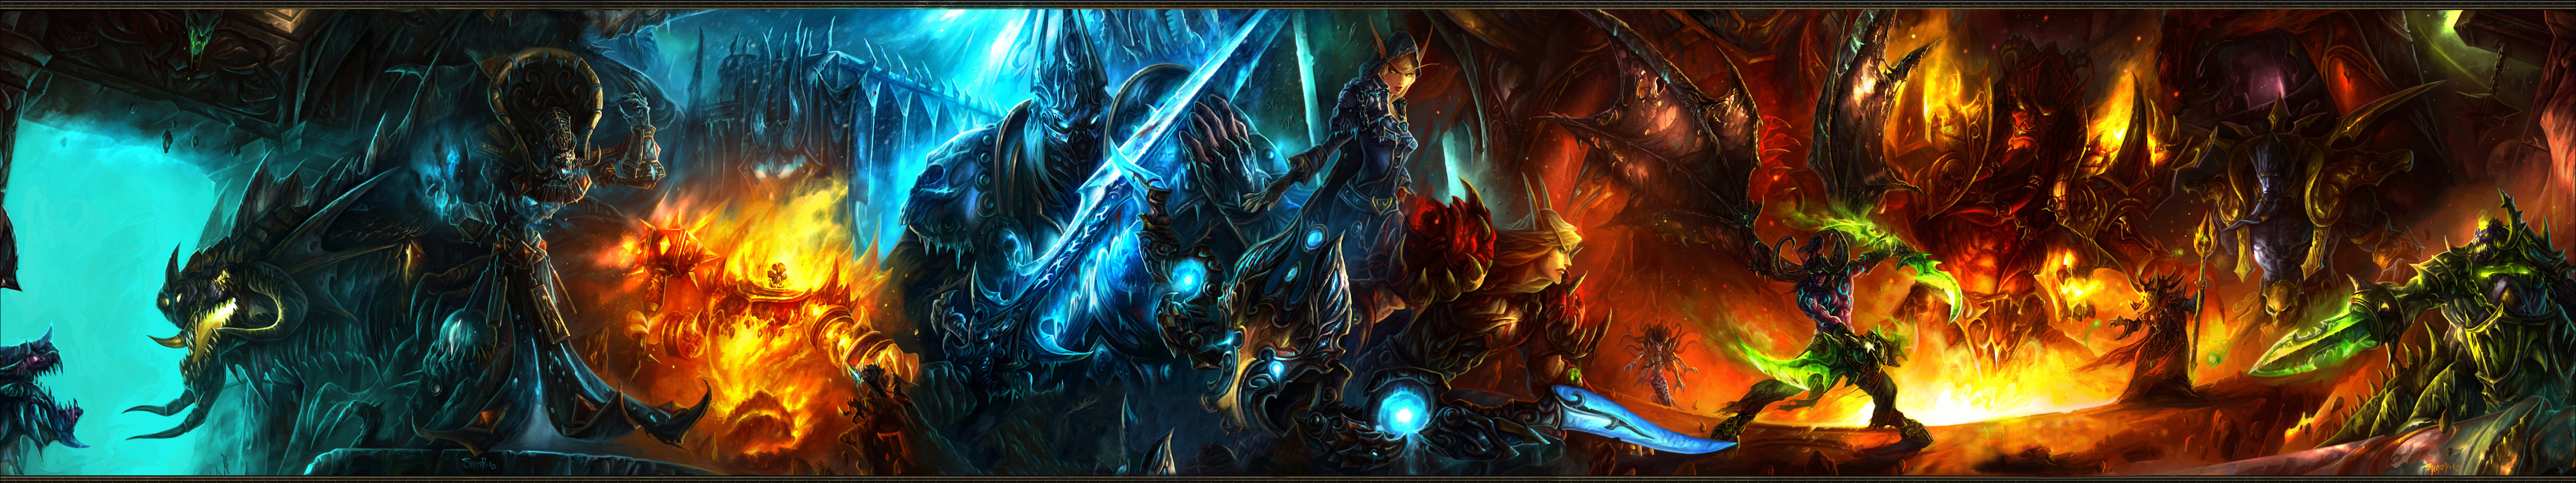 World Of Warcraft Full HD Wallpaper And Background